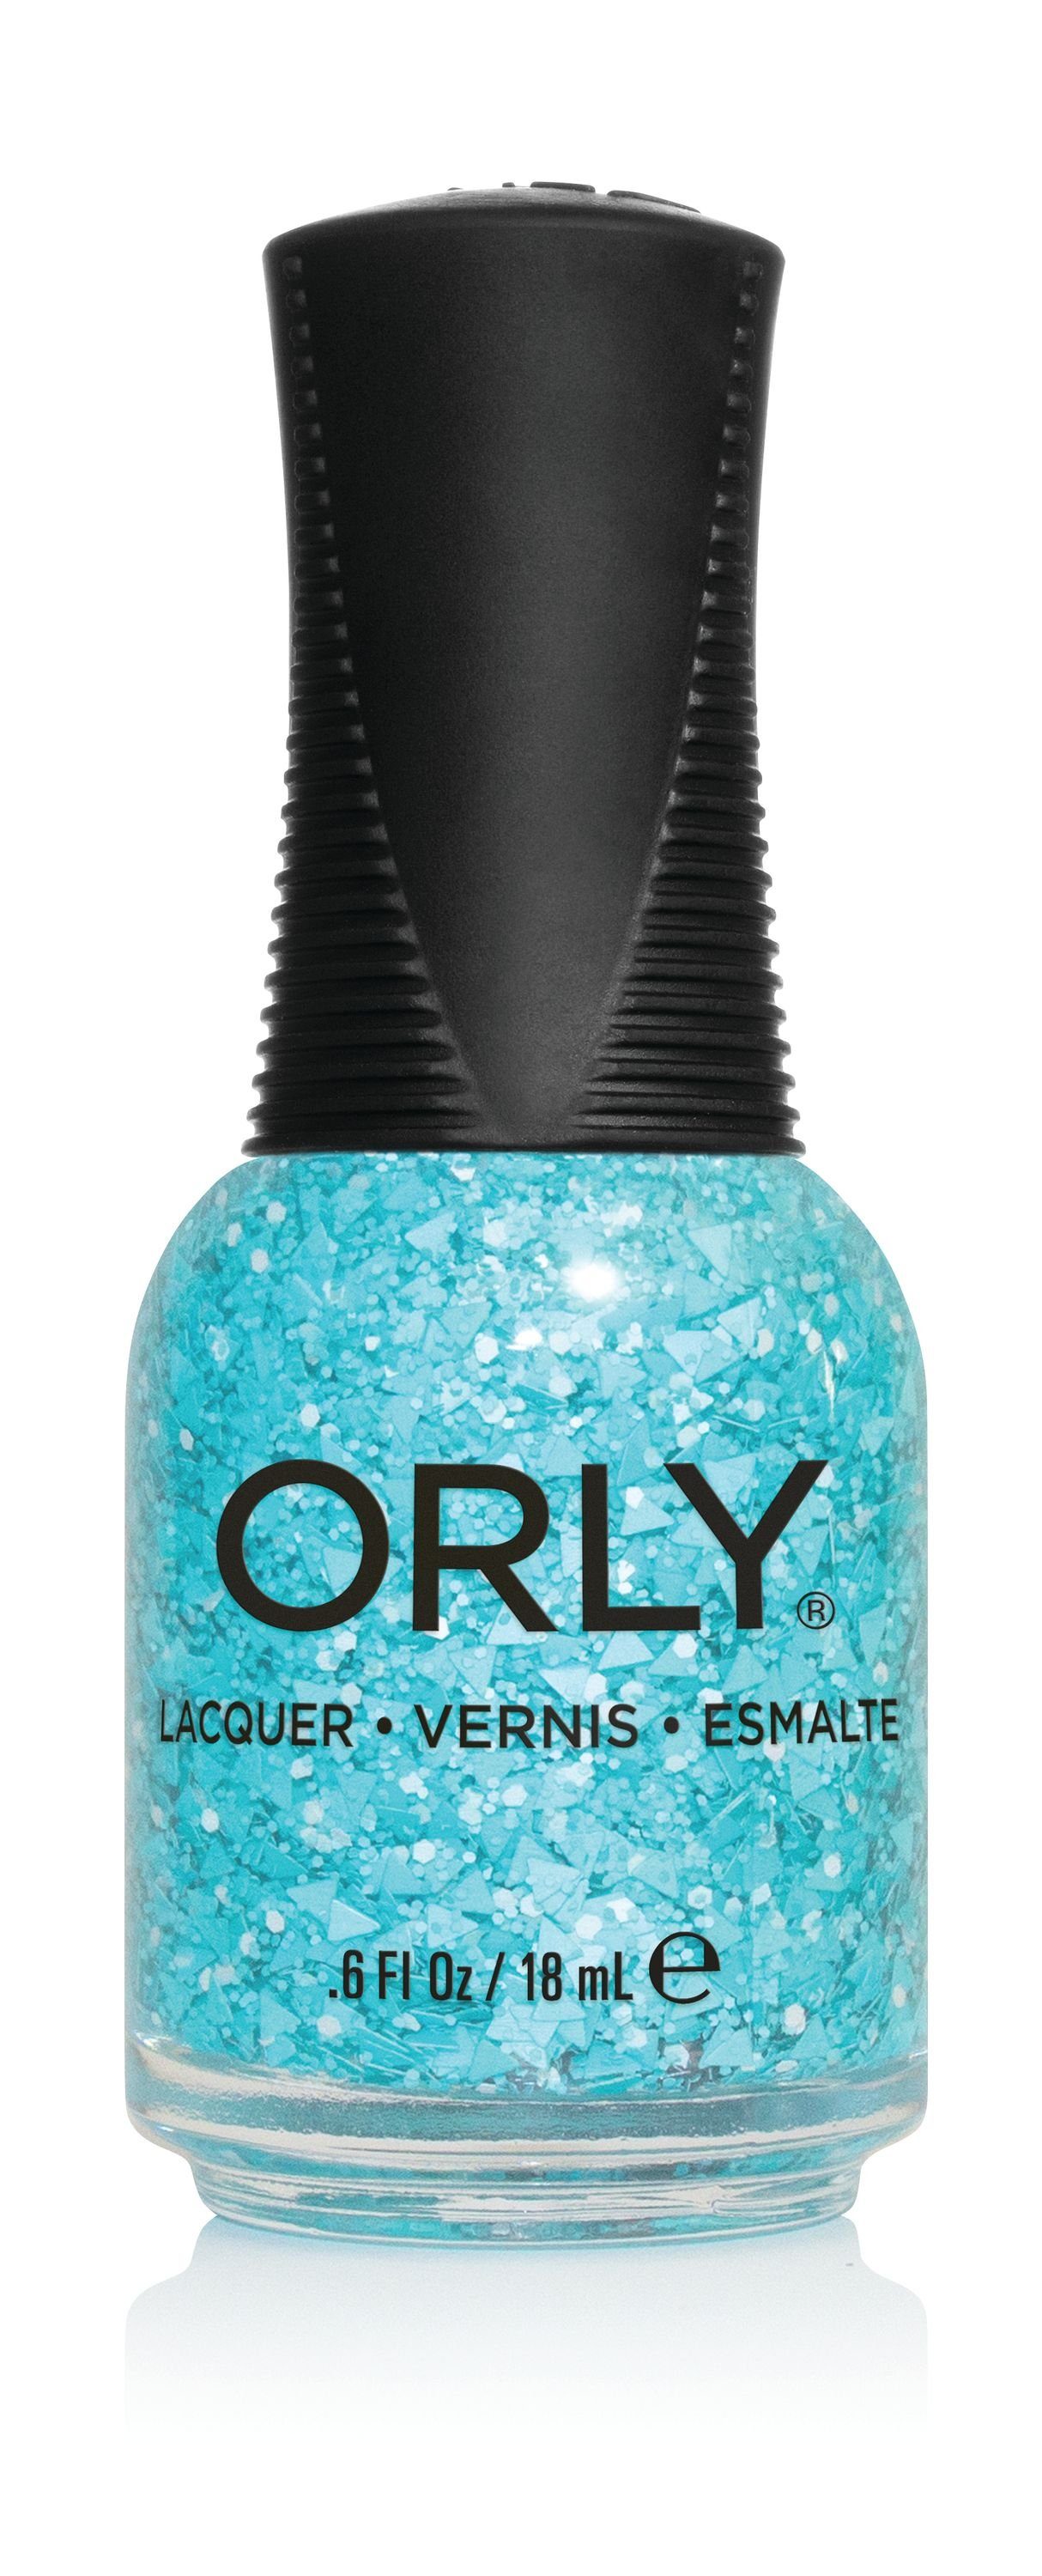 Nagellack 18ML What's ORLY ORLY The - Nagellack Big Teal,